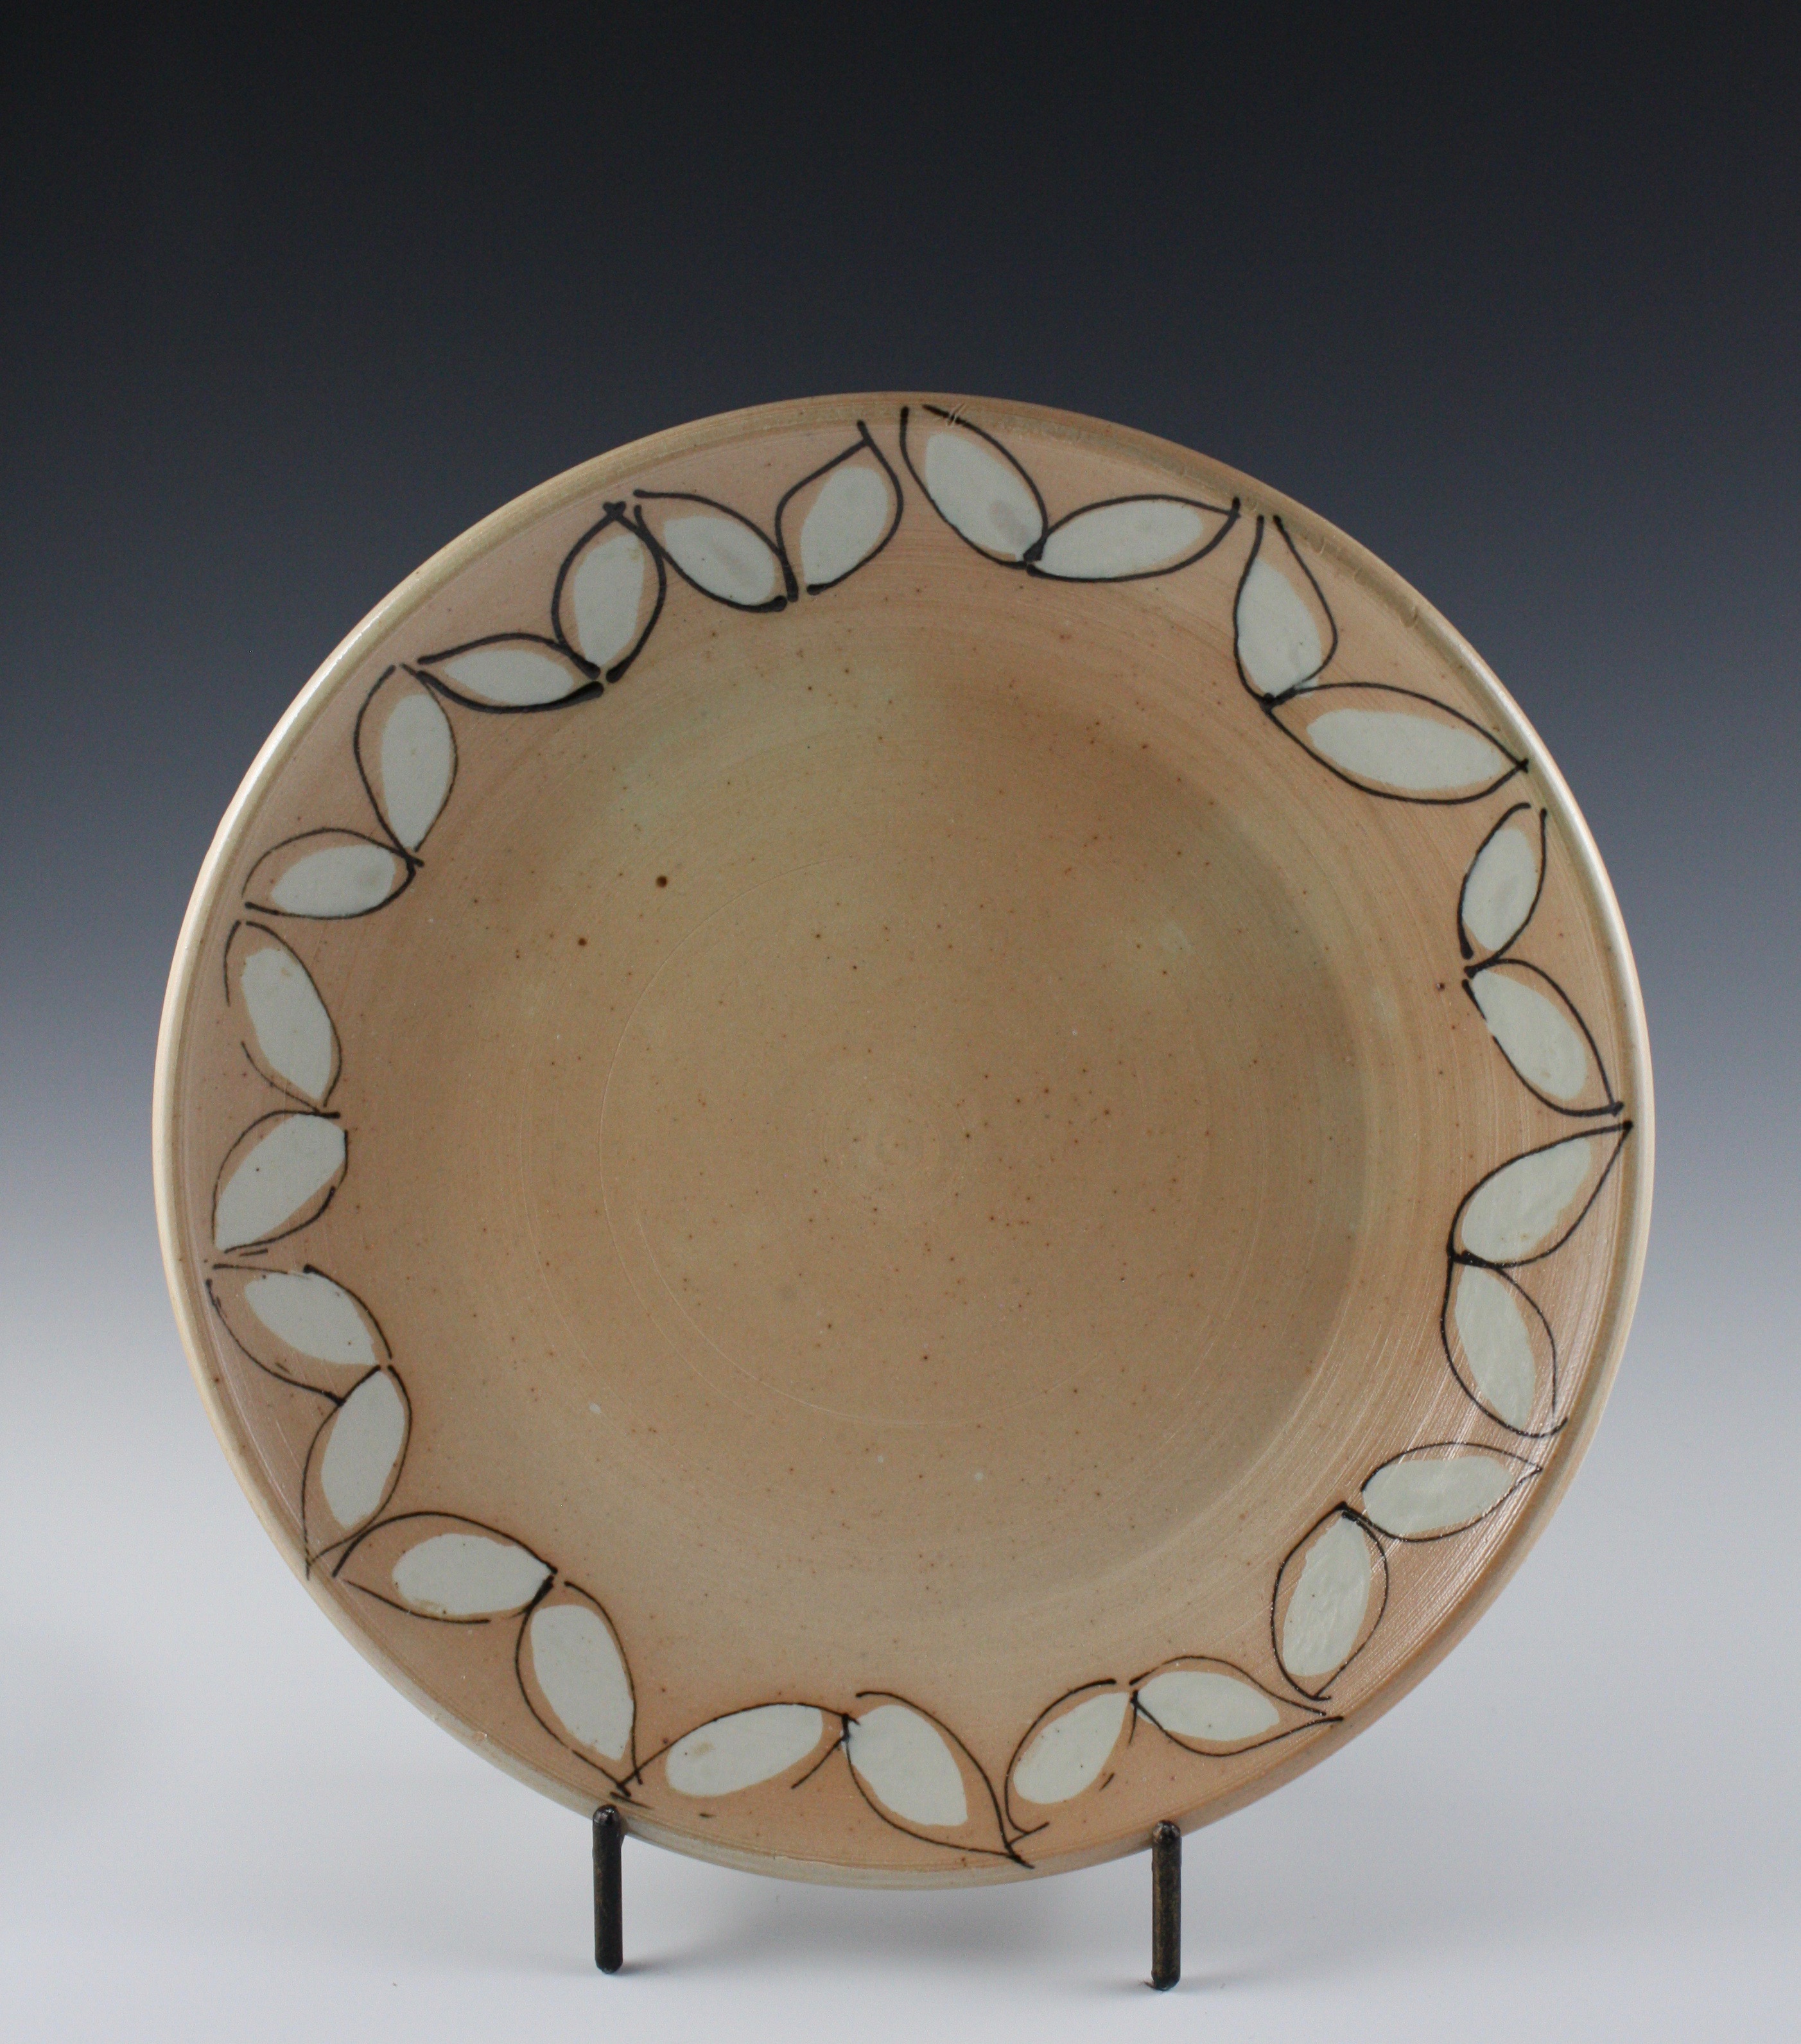 Plate with Leaf Design #6